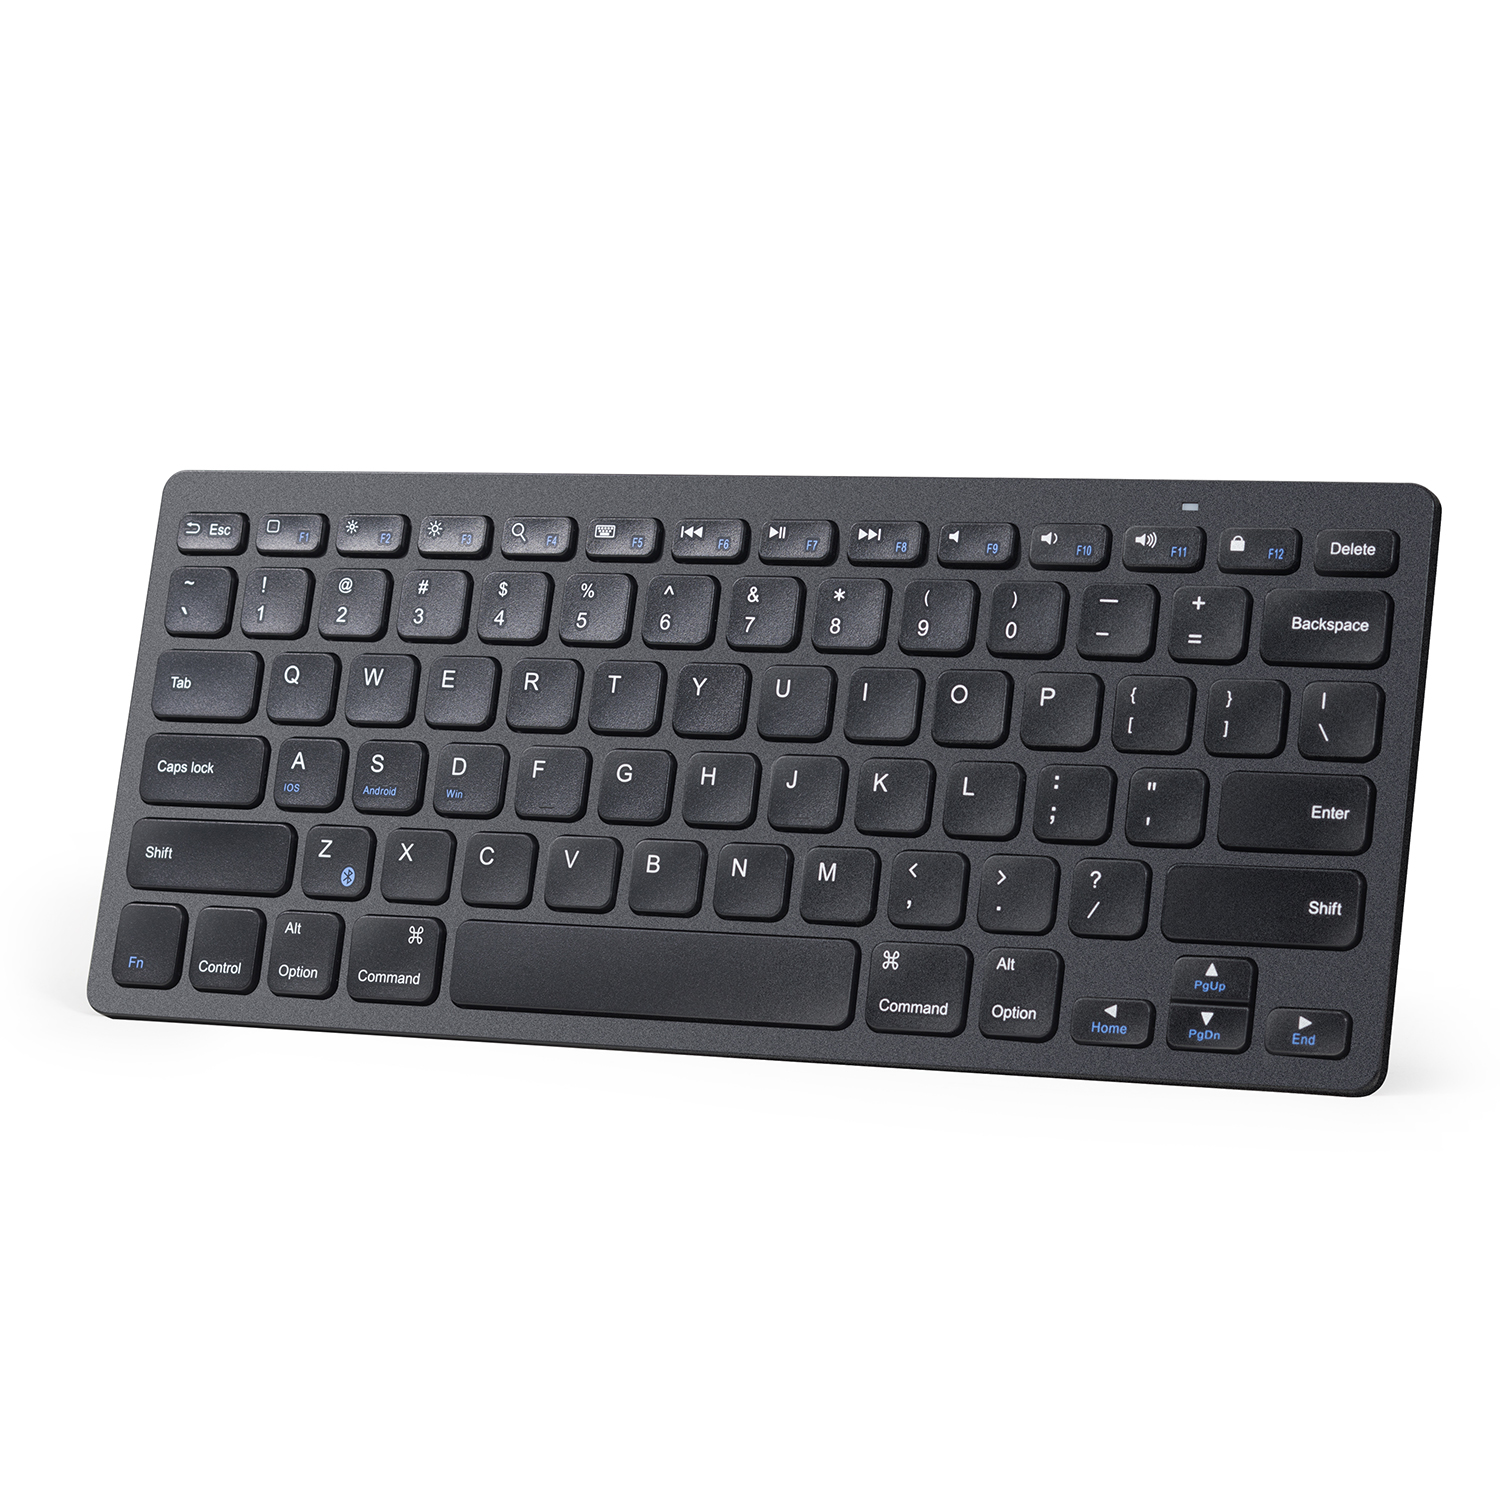 Anker Bluetooth Ultra-Slim Keyboard for iPad, Galaxy Tabs and Other Mobile Devices, Black - image 1 of 6